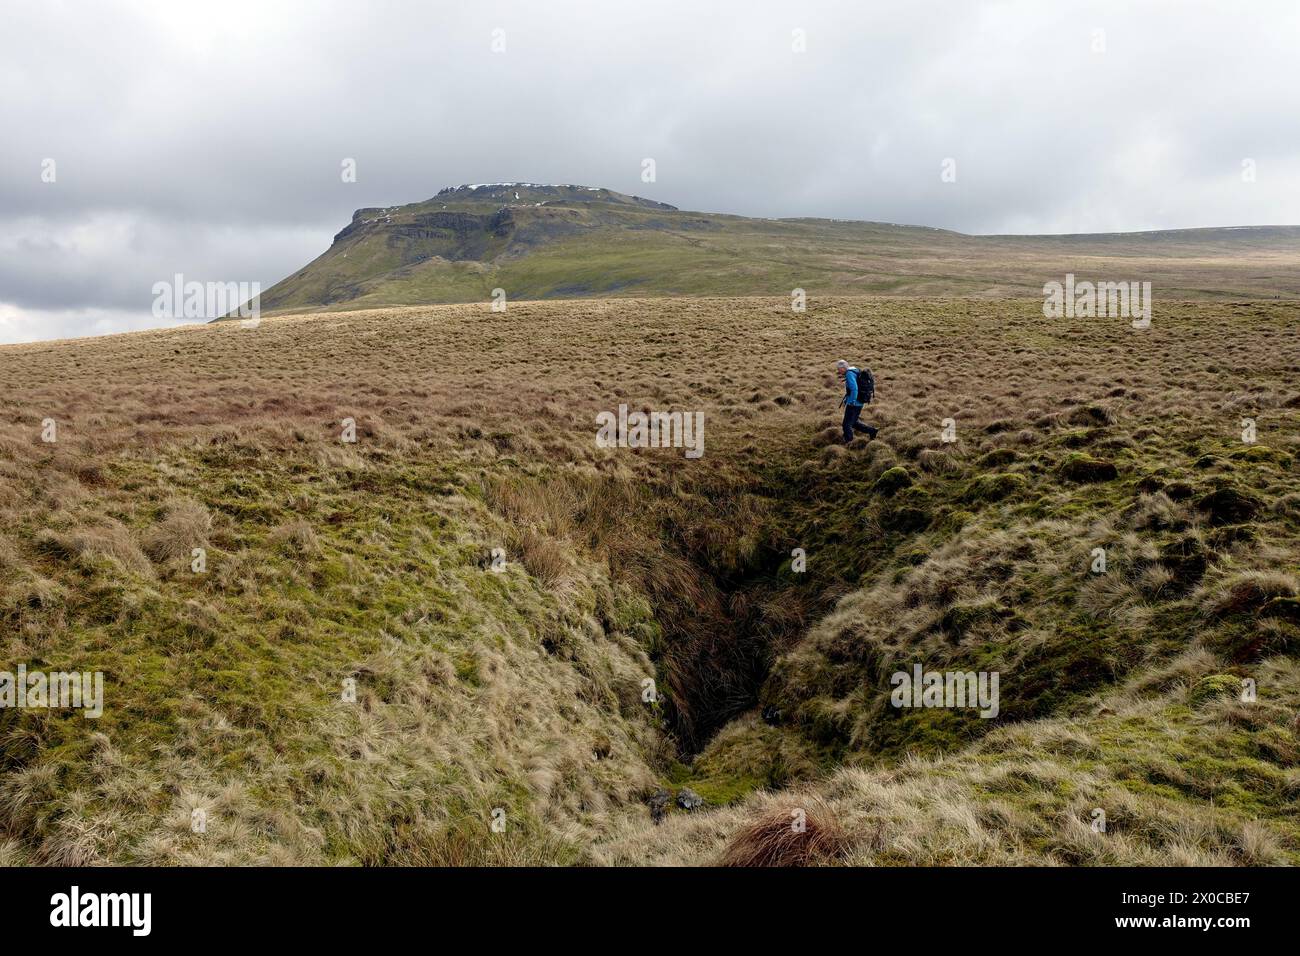 Man (escursionista) Walking by Pot Hole vicino a Tatham Wife Moss sotto Ingleborough Mountain nel Yorkshire Dales National Park, Inghilterra, Regno Unito. Foto Stock